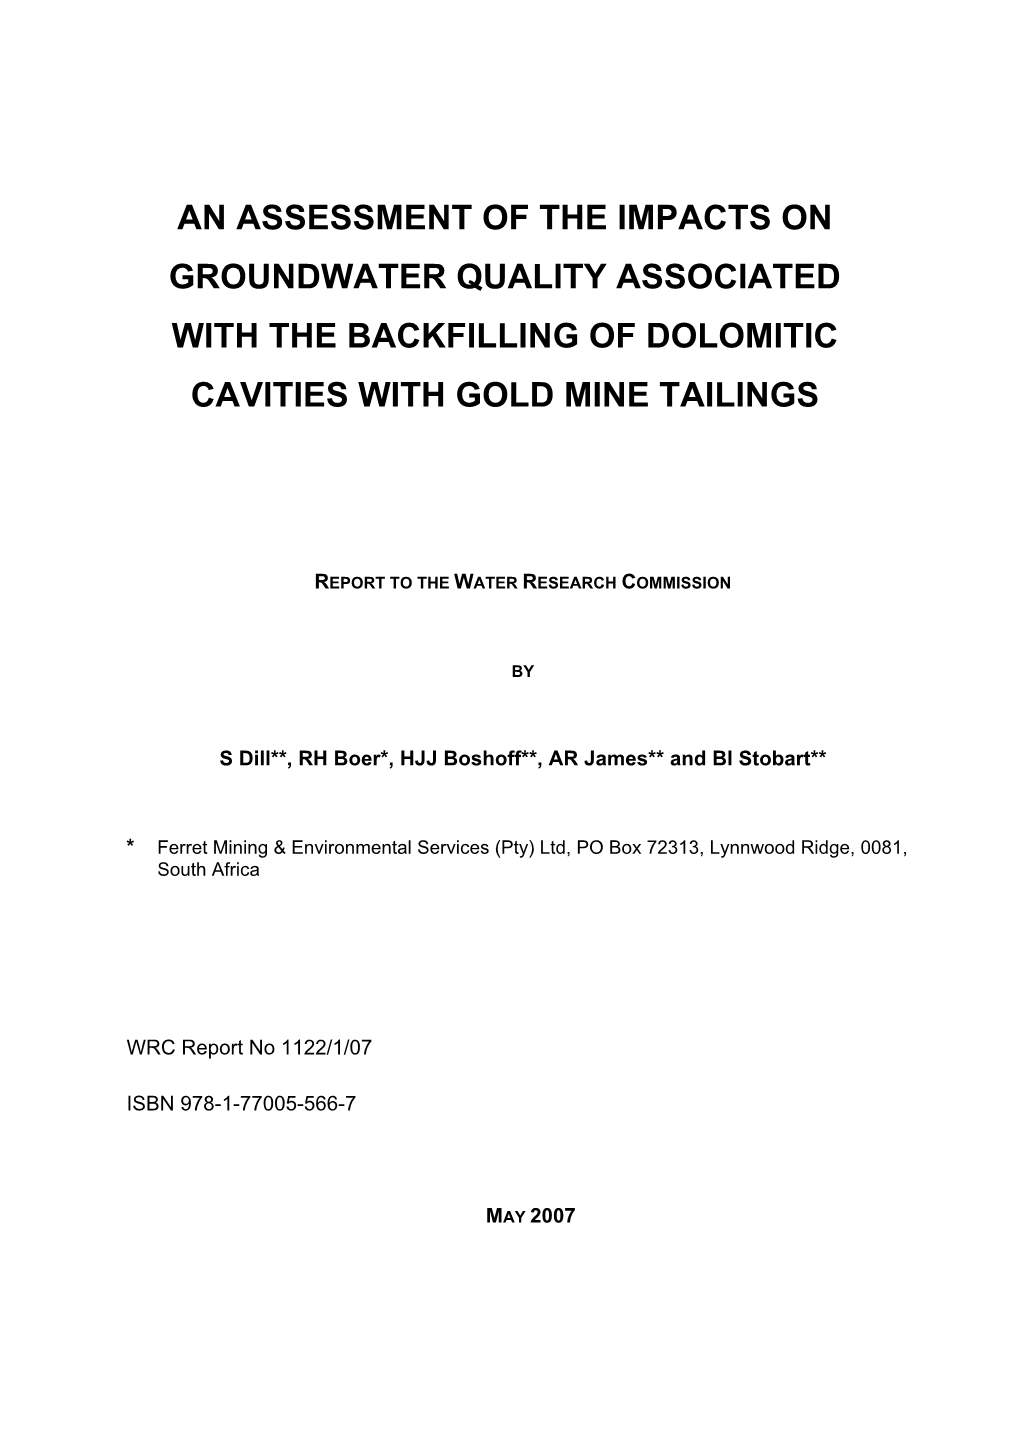 An Assessment of the Impacts on Groundwater Quality Associated with the Backfilling of Dolomitic Cavities with Gold Mine Tailings